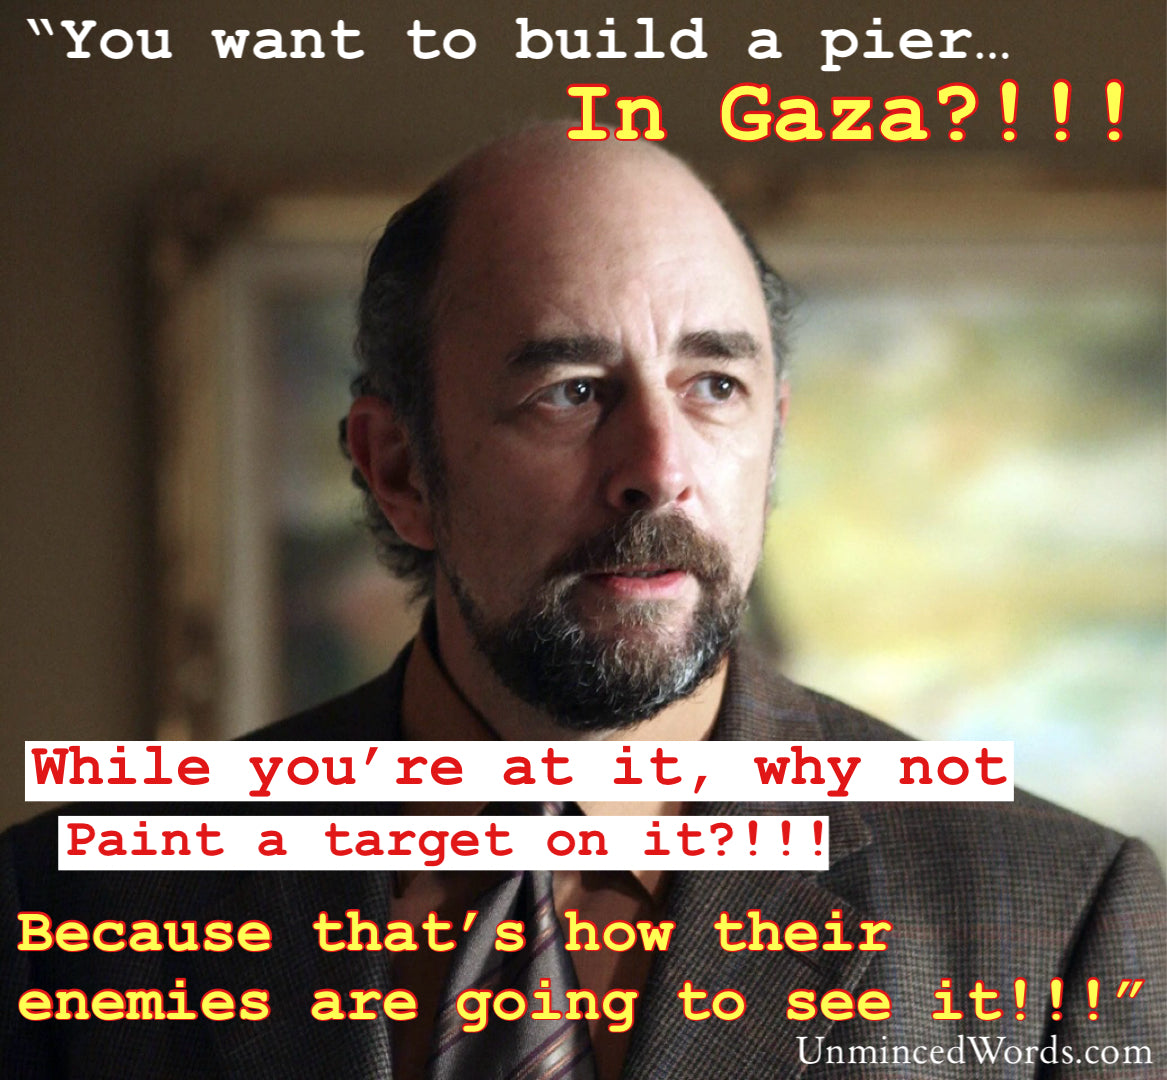 Toby Ziegler on the building of a pier in Gaza